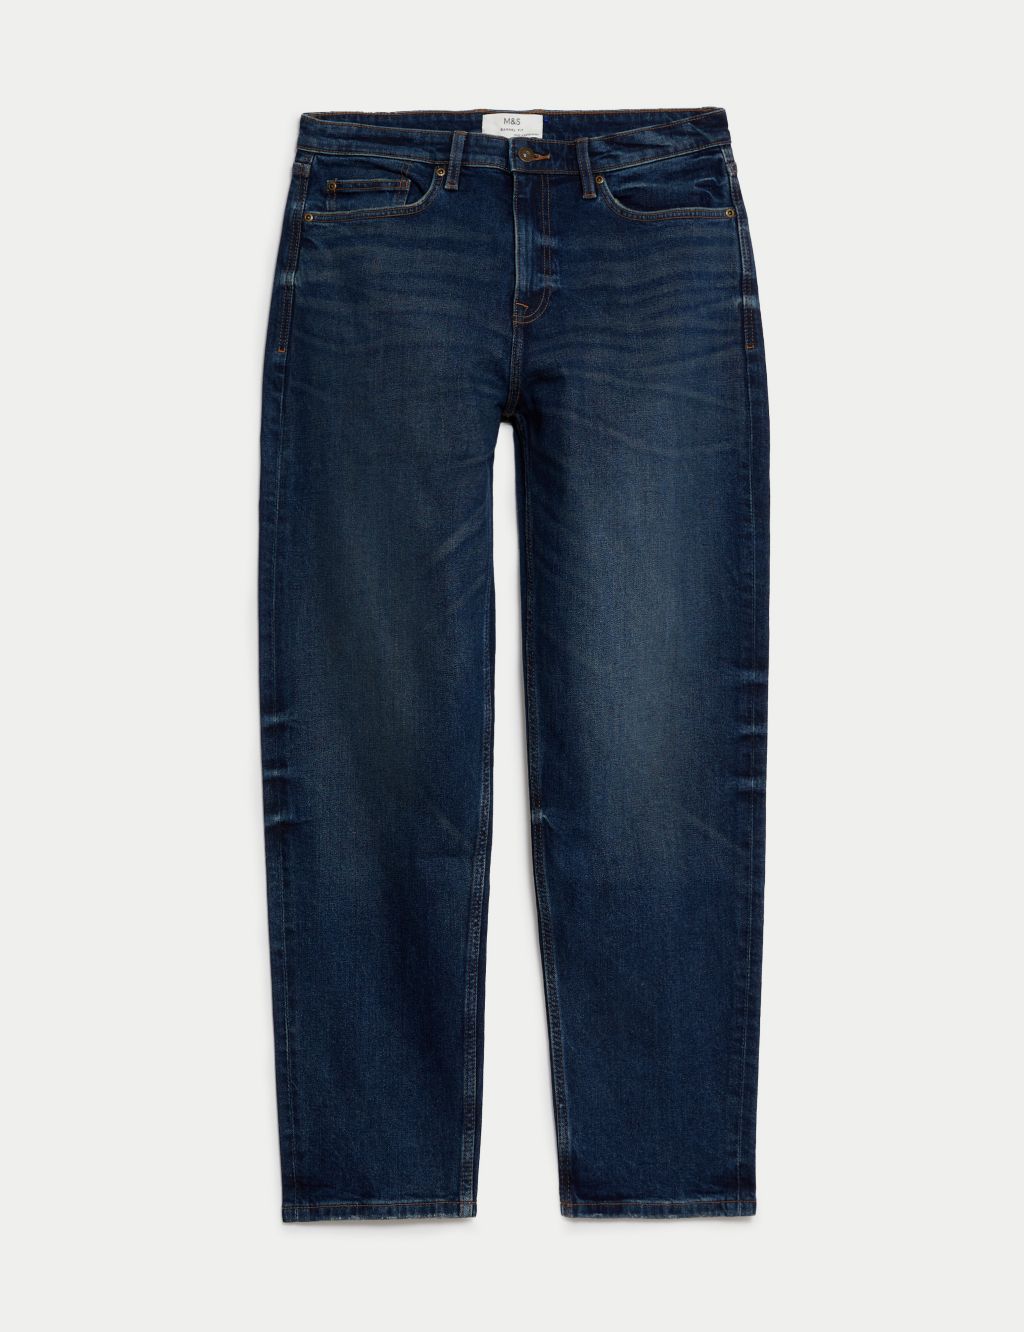 Relaxed Tapered Vintage Wash Jeans image 2